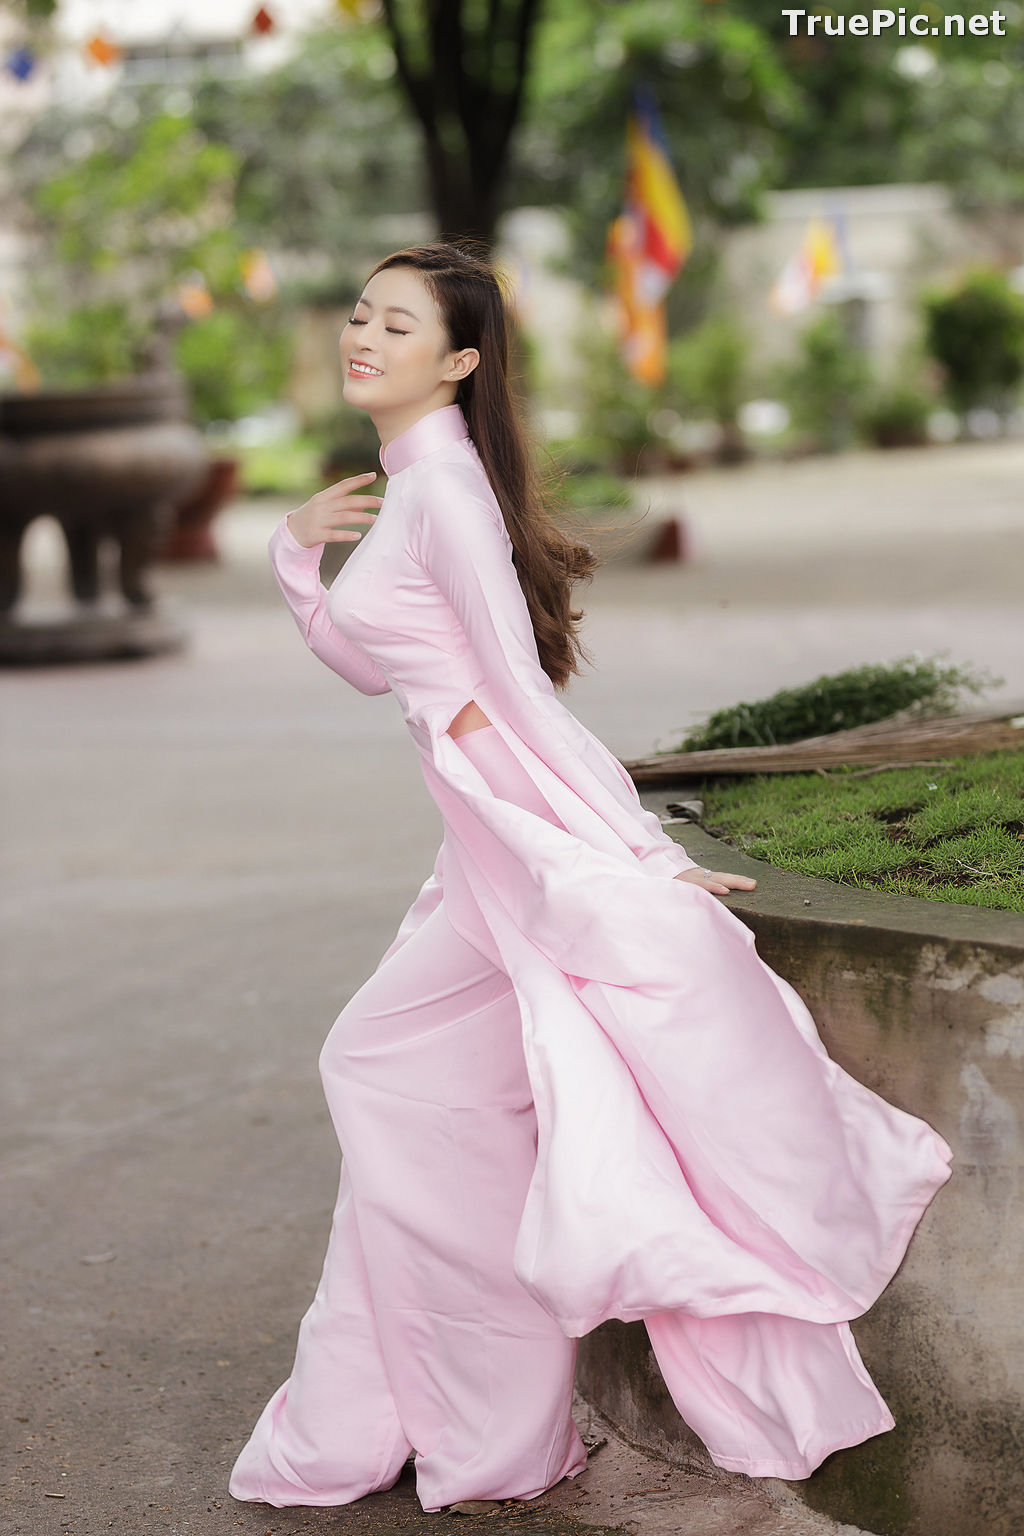 Image The Beauty of Vietnamese Girls with Traditional Dress (Ao Dai) #1 - TruePic.net - Picture-52